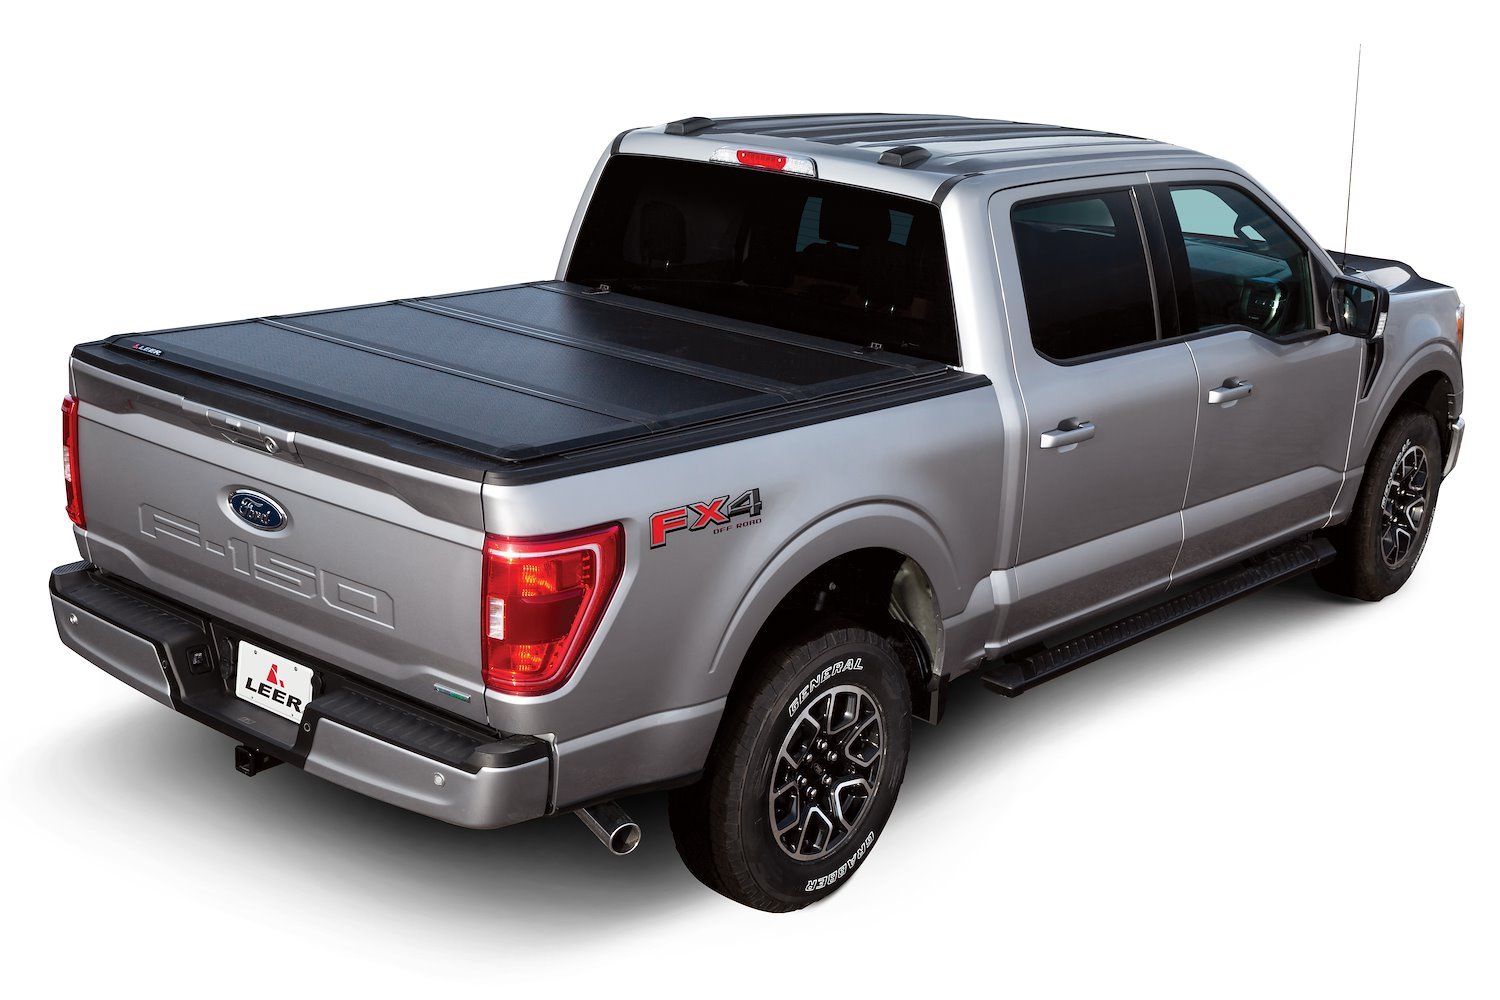 HF350M Hard Tri-Folding Tonneau Cover Fits Select Chevrolet Colorado/GMC Canyon [Bed Length: 6 ft. 2 in.]